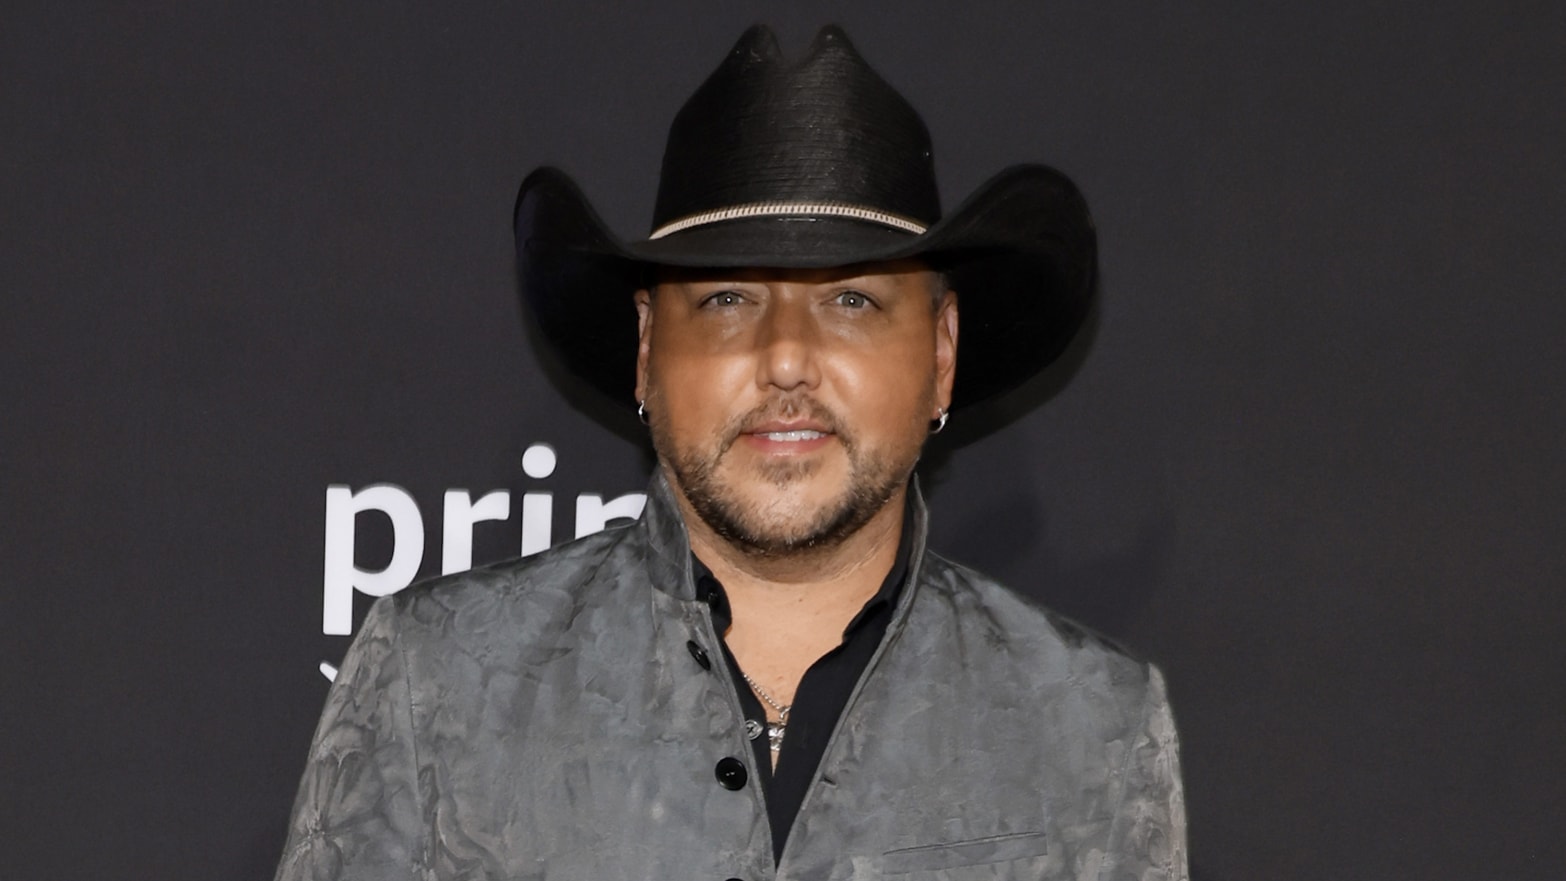 Jason Aldean at the 2023 Academy of Country Music Awards